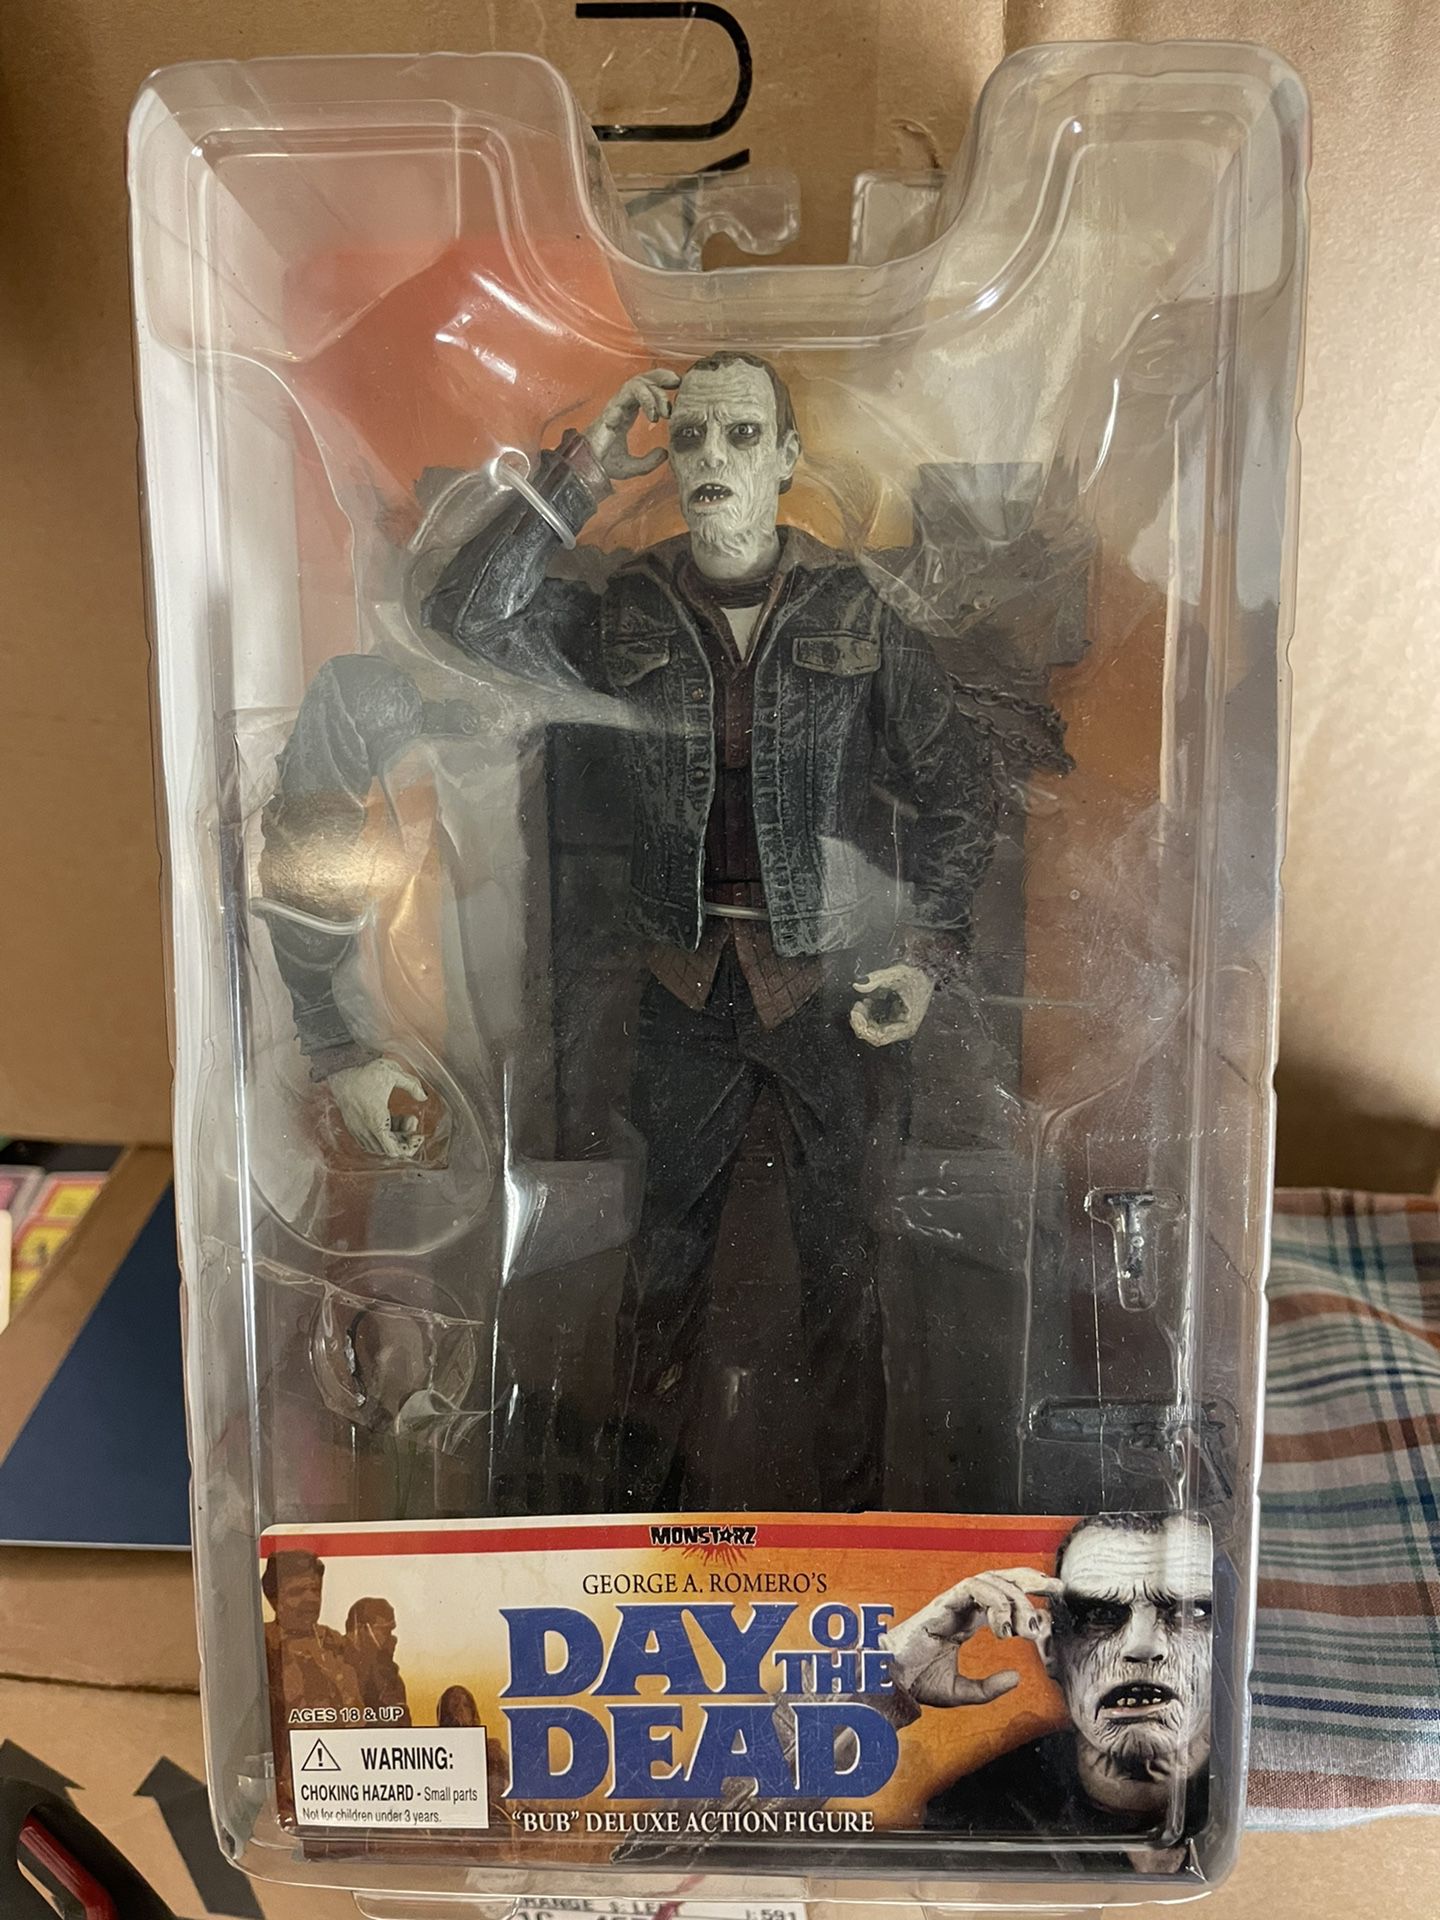 George Romero’s DAY OF THE DEAD “BUB” Deluxe Action Figure Amok Time Monstarz 